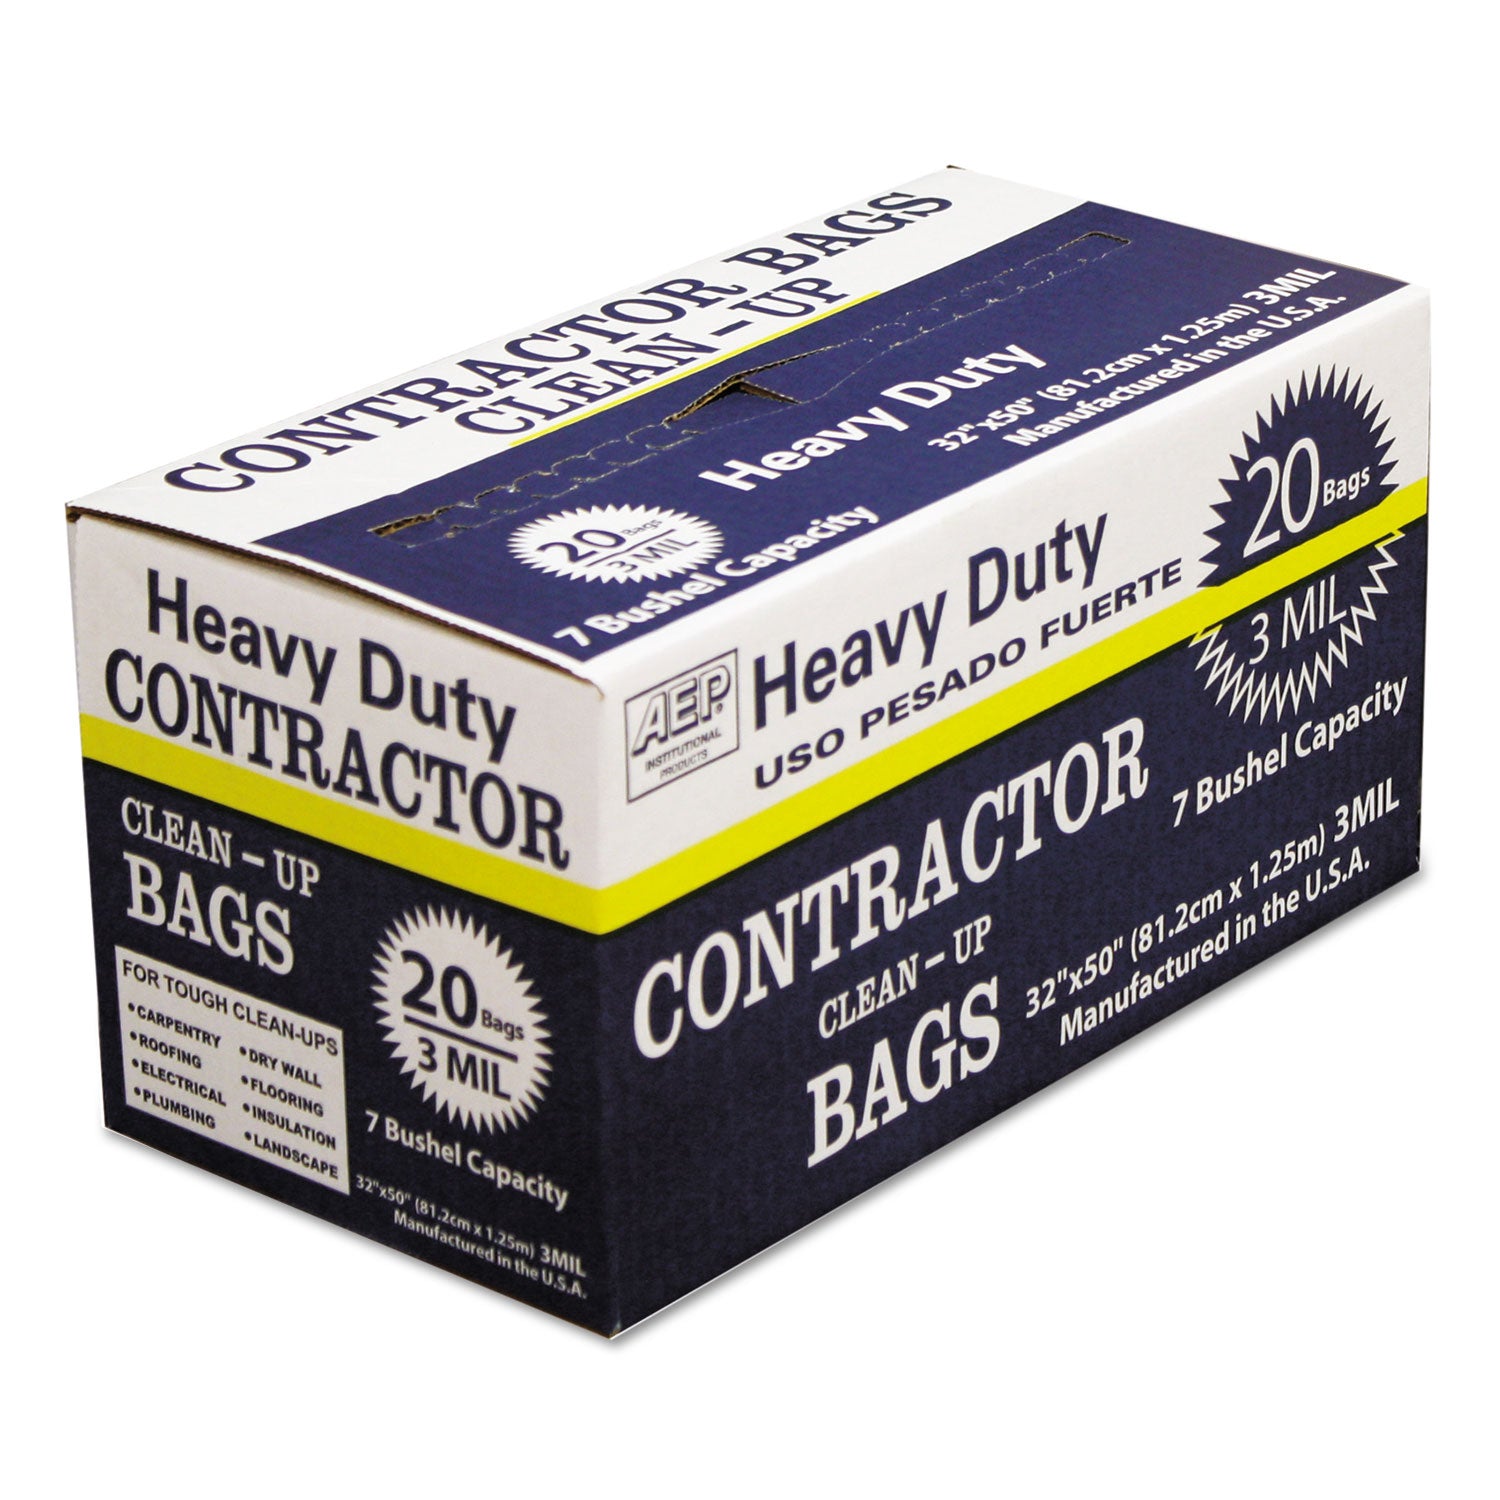 heavy-duty-contractor-clean-up-bags-60-gal-3-mil-32-x-50-black-20-carton_wbi186470 - 1